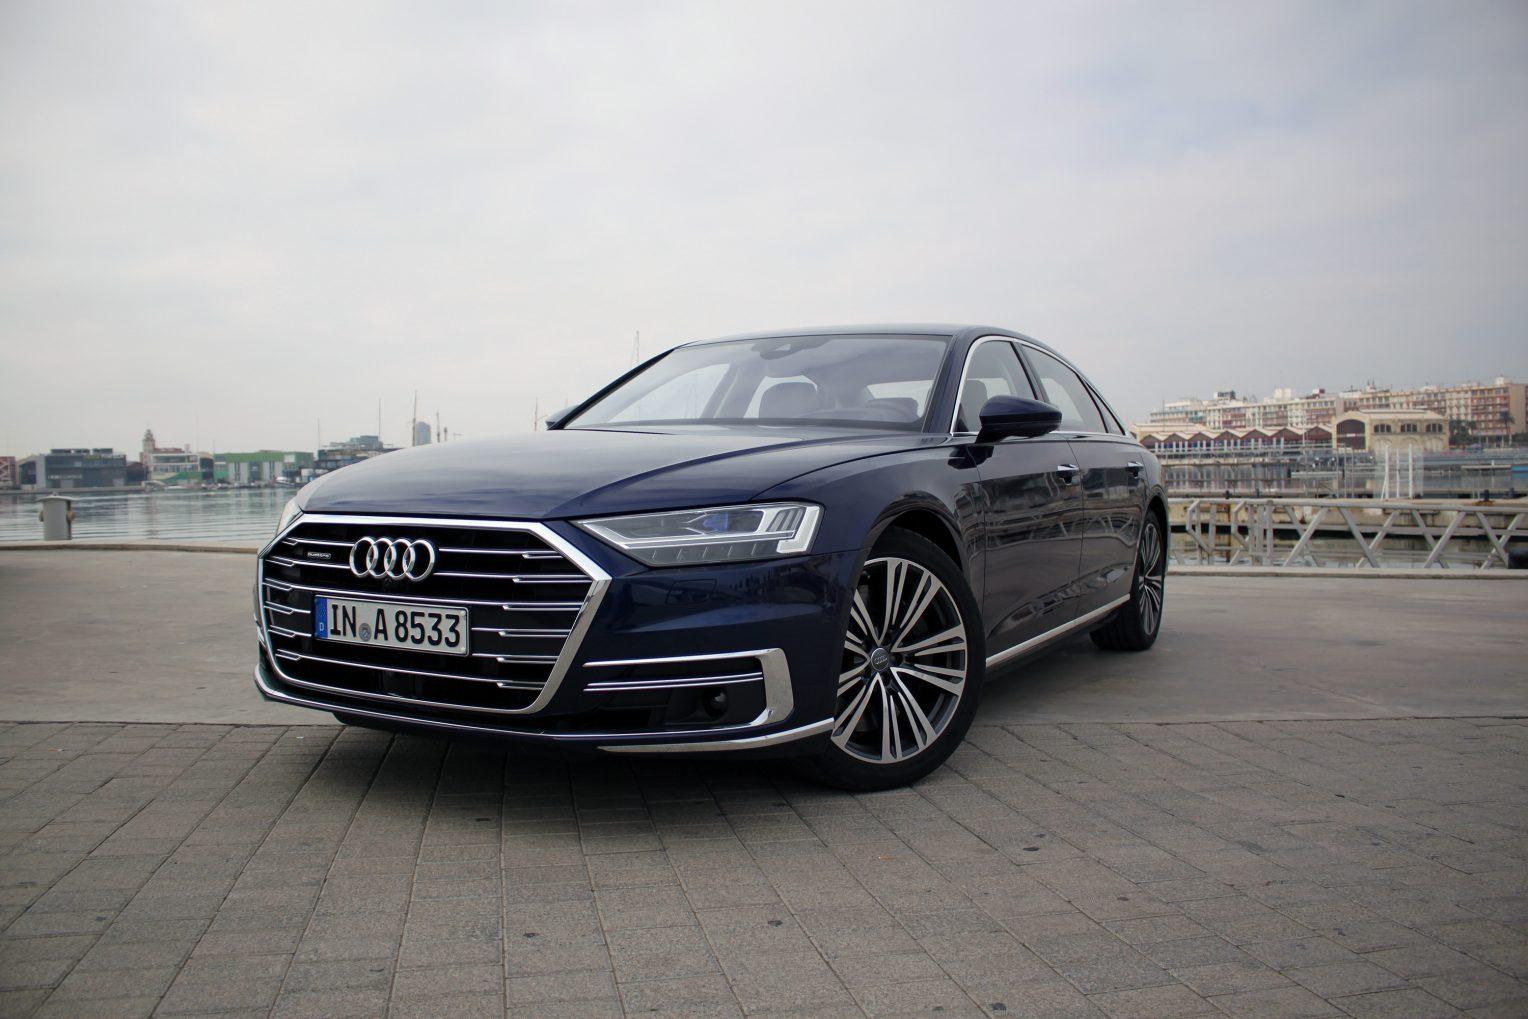 Audi A4 Front Wallpaper. New Autocar Release with regard to